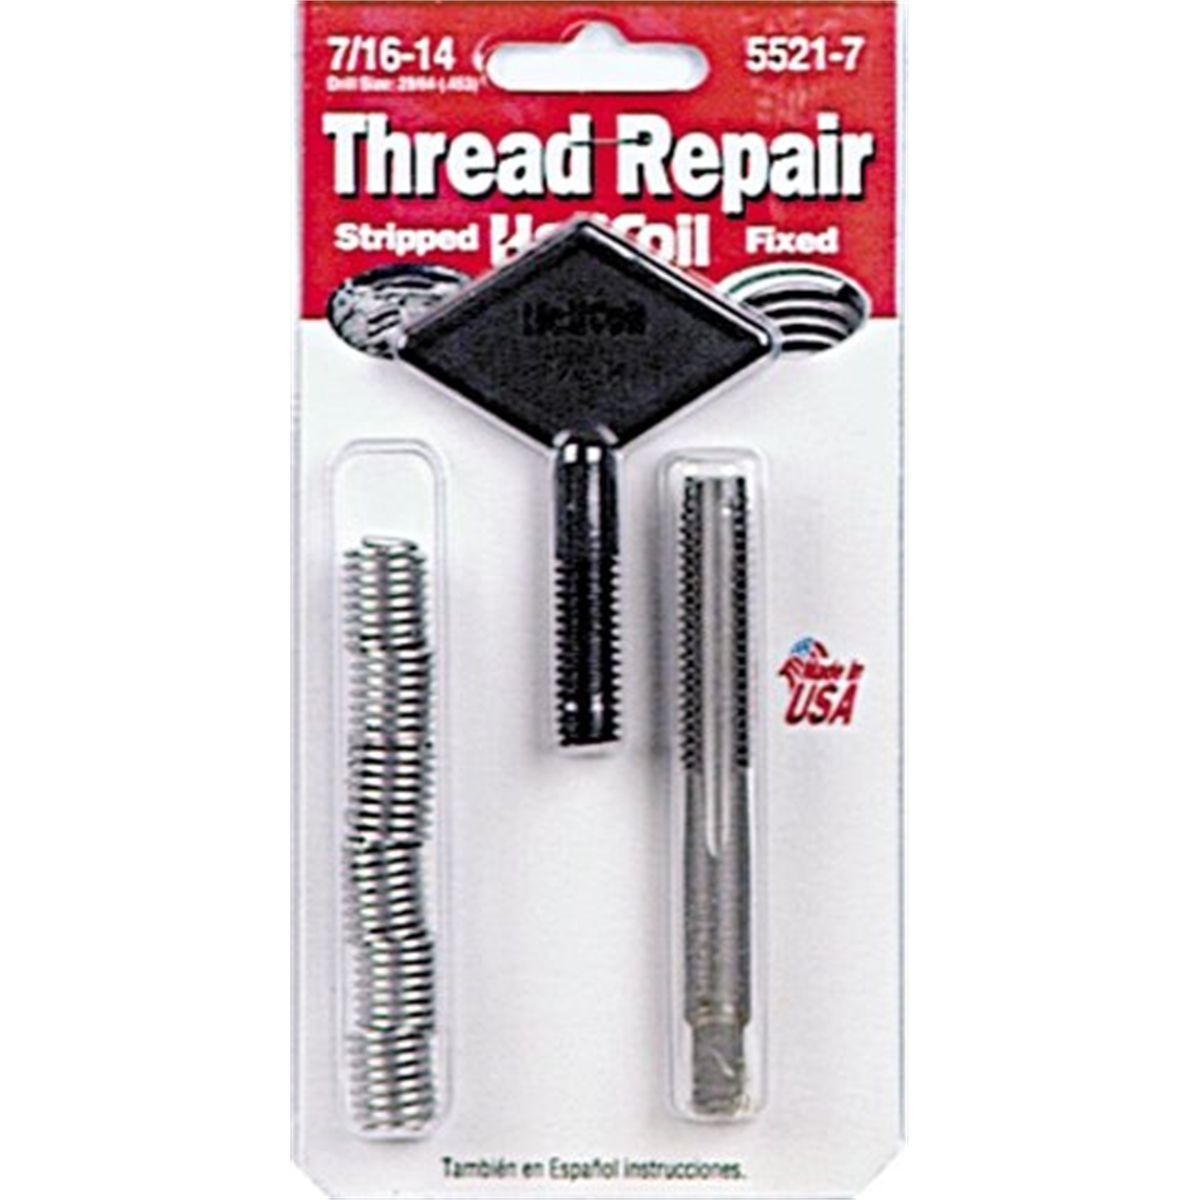 7/16" x 14 UNC Imperial Tap Repair Cutter Kit Helicoil Damaged Threads 14pc Kit